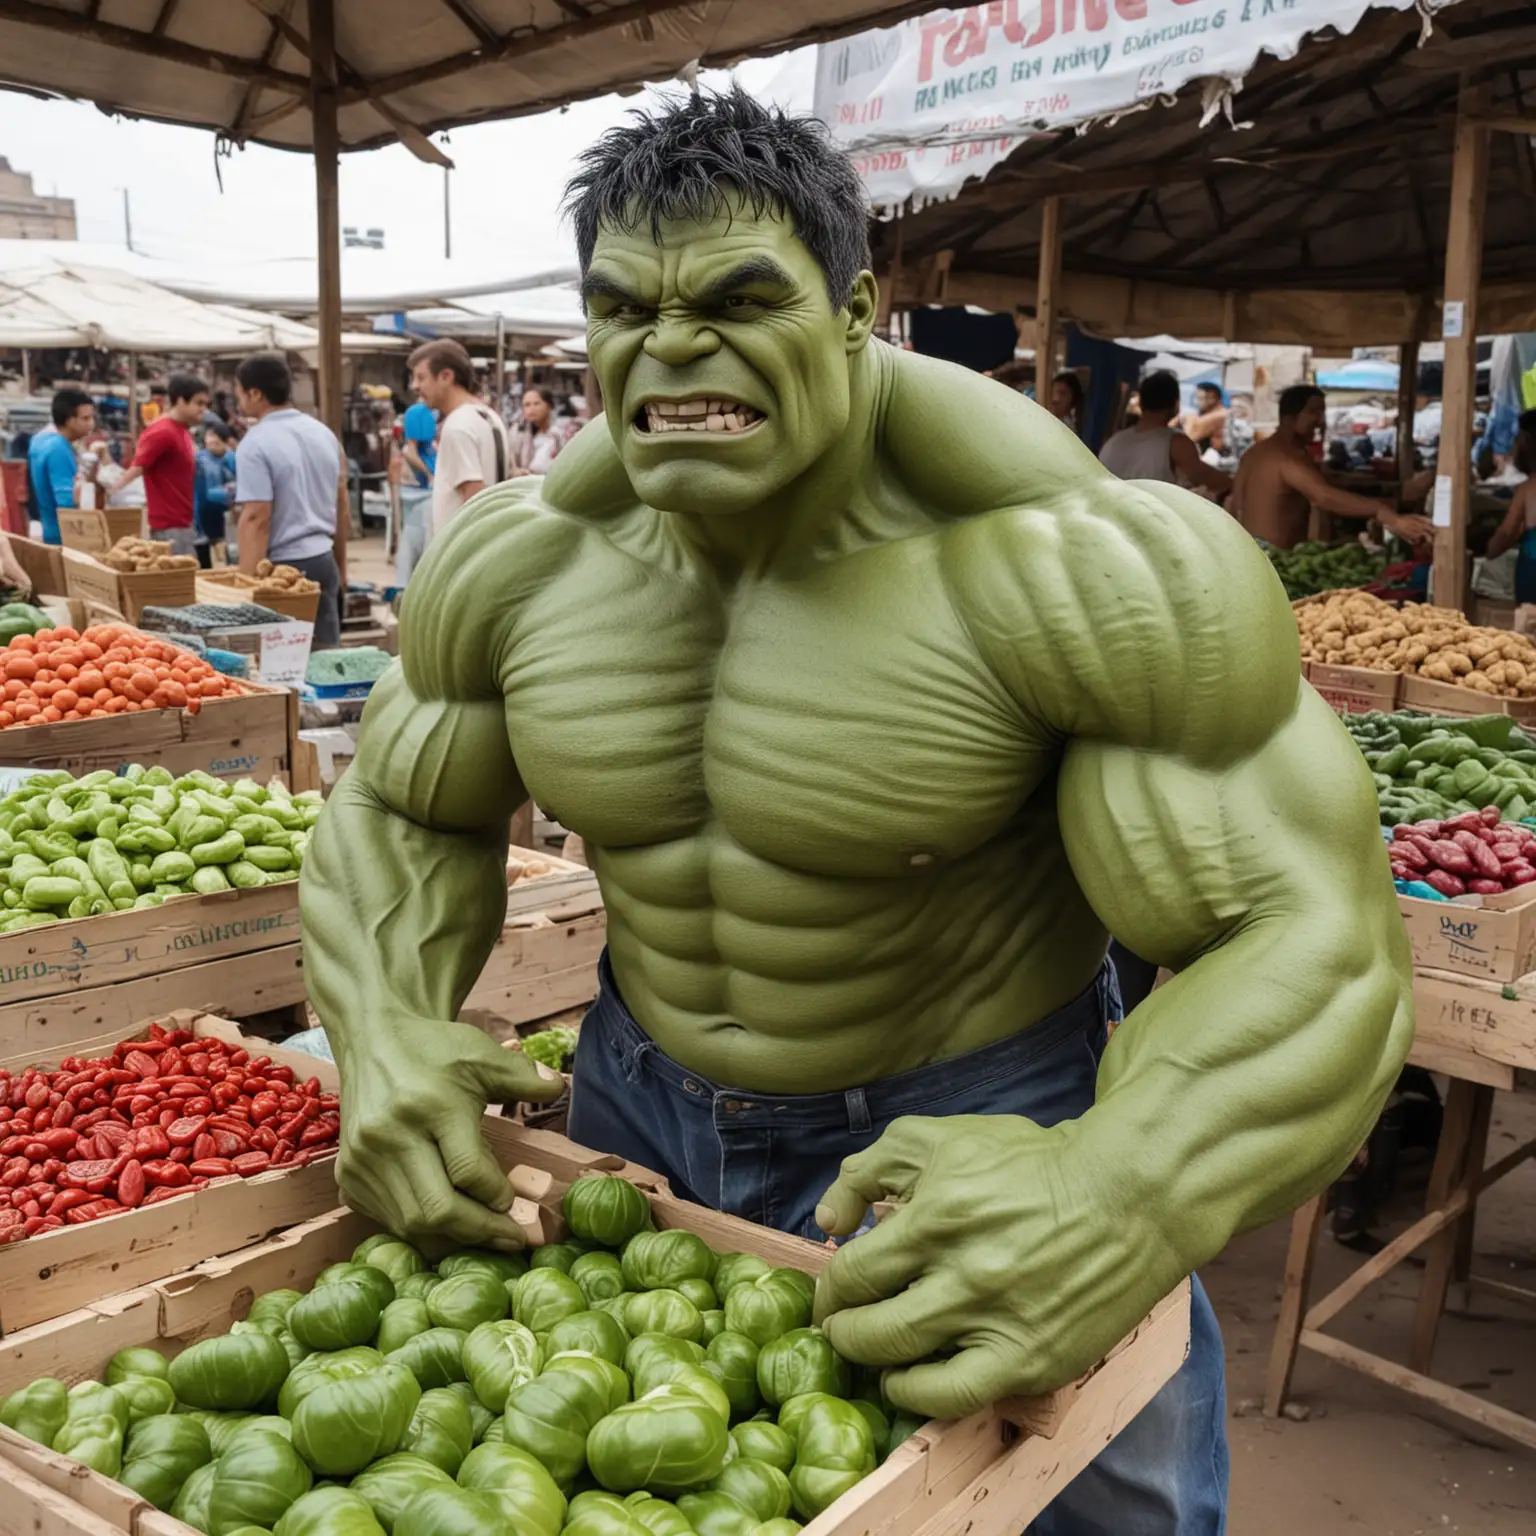 Hulk is selling peci at the traditional market